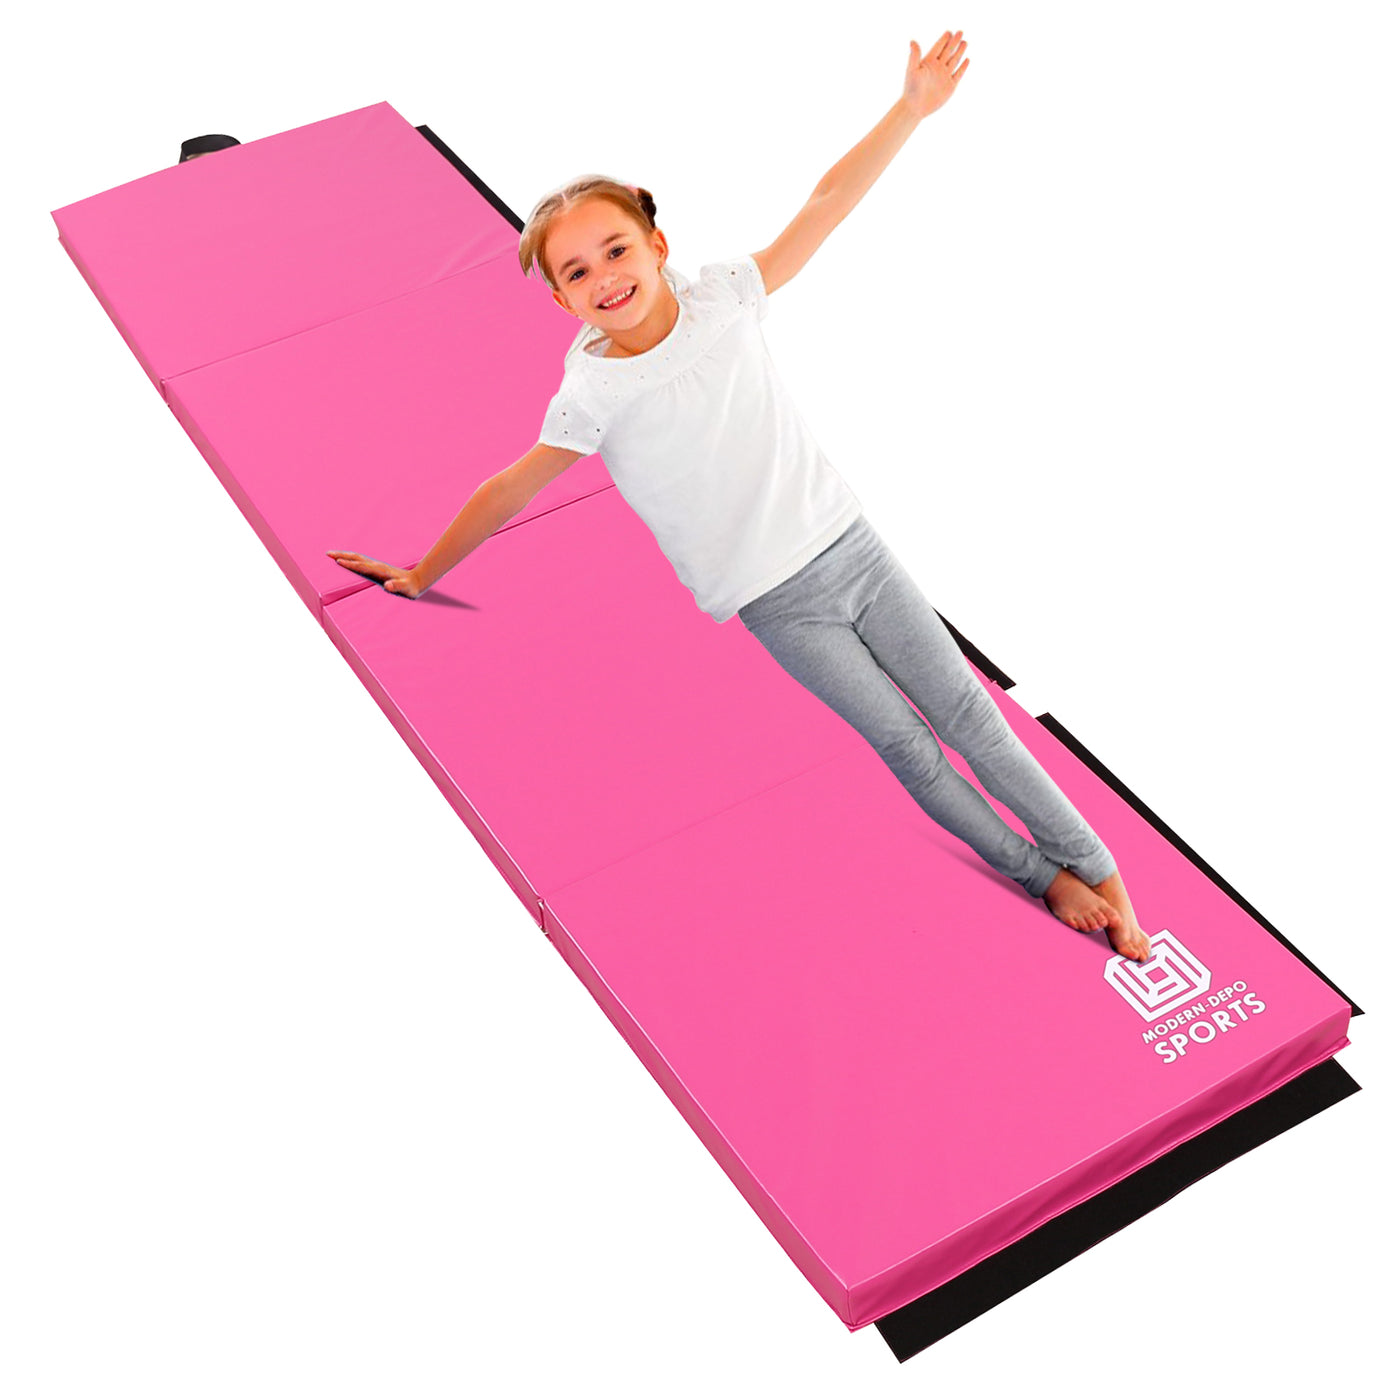 Gymnastics Mat 8'x2'x2" Foldable Tumbling Mats with Carrying Handles Four Fold Thick Exercise Mat for Home Aerobics Stretching Yoga, Pink